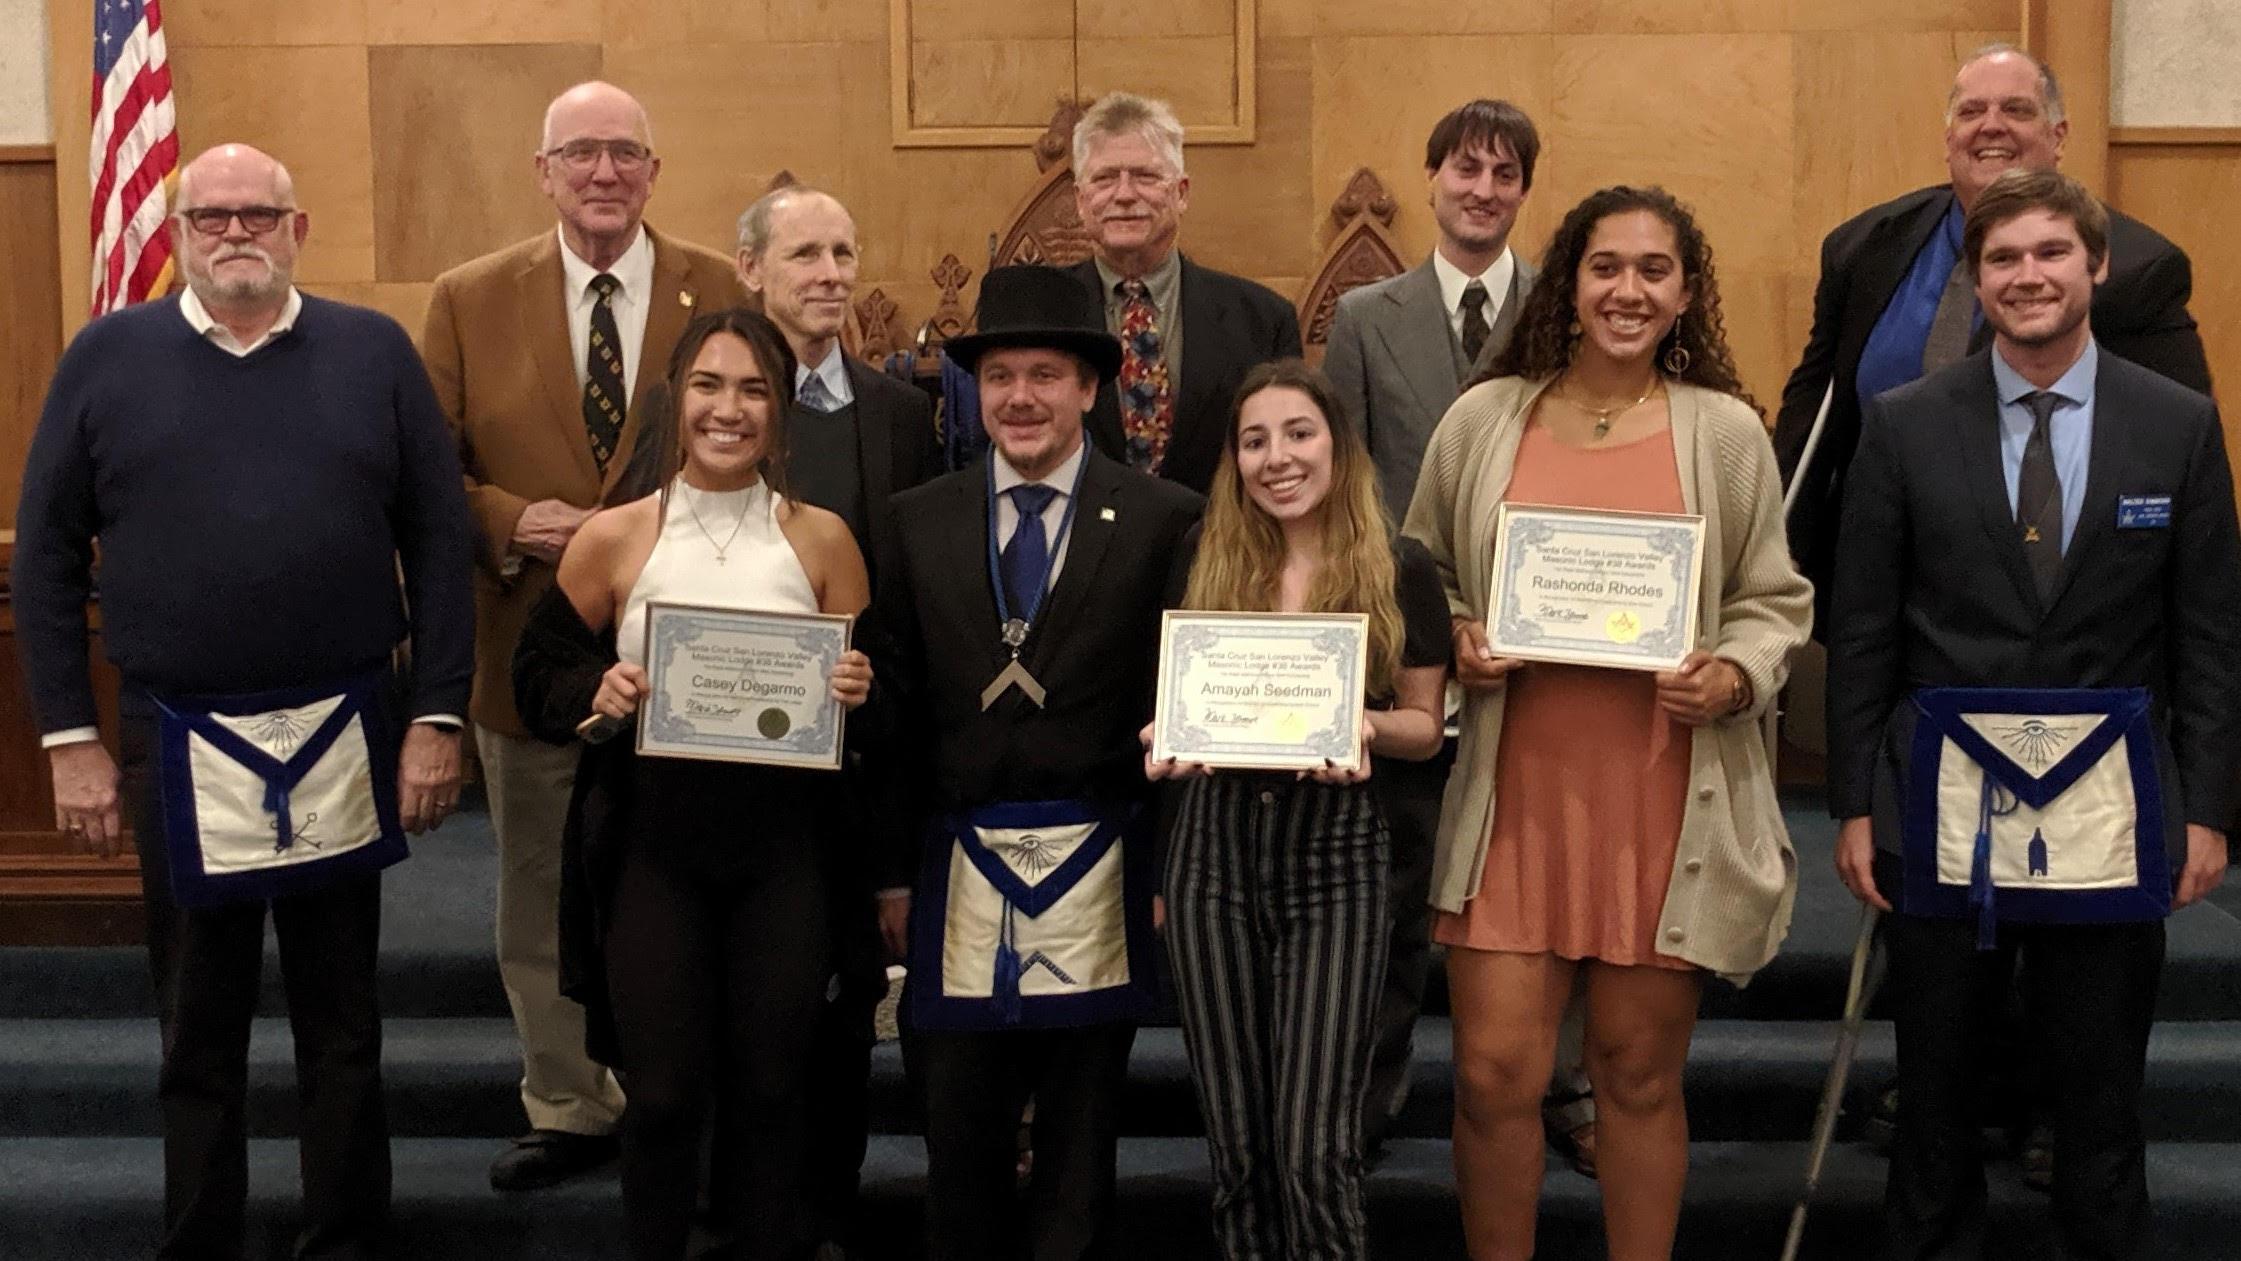 Amayah Seedhman and other recipients of the Masonic award